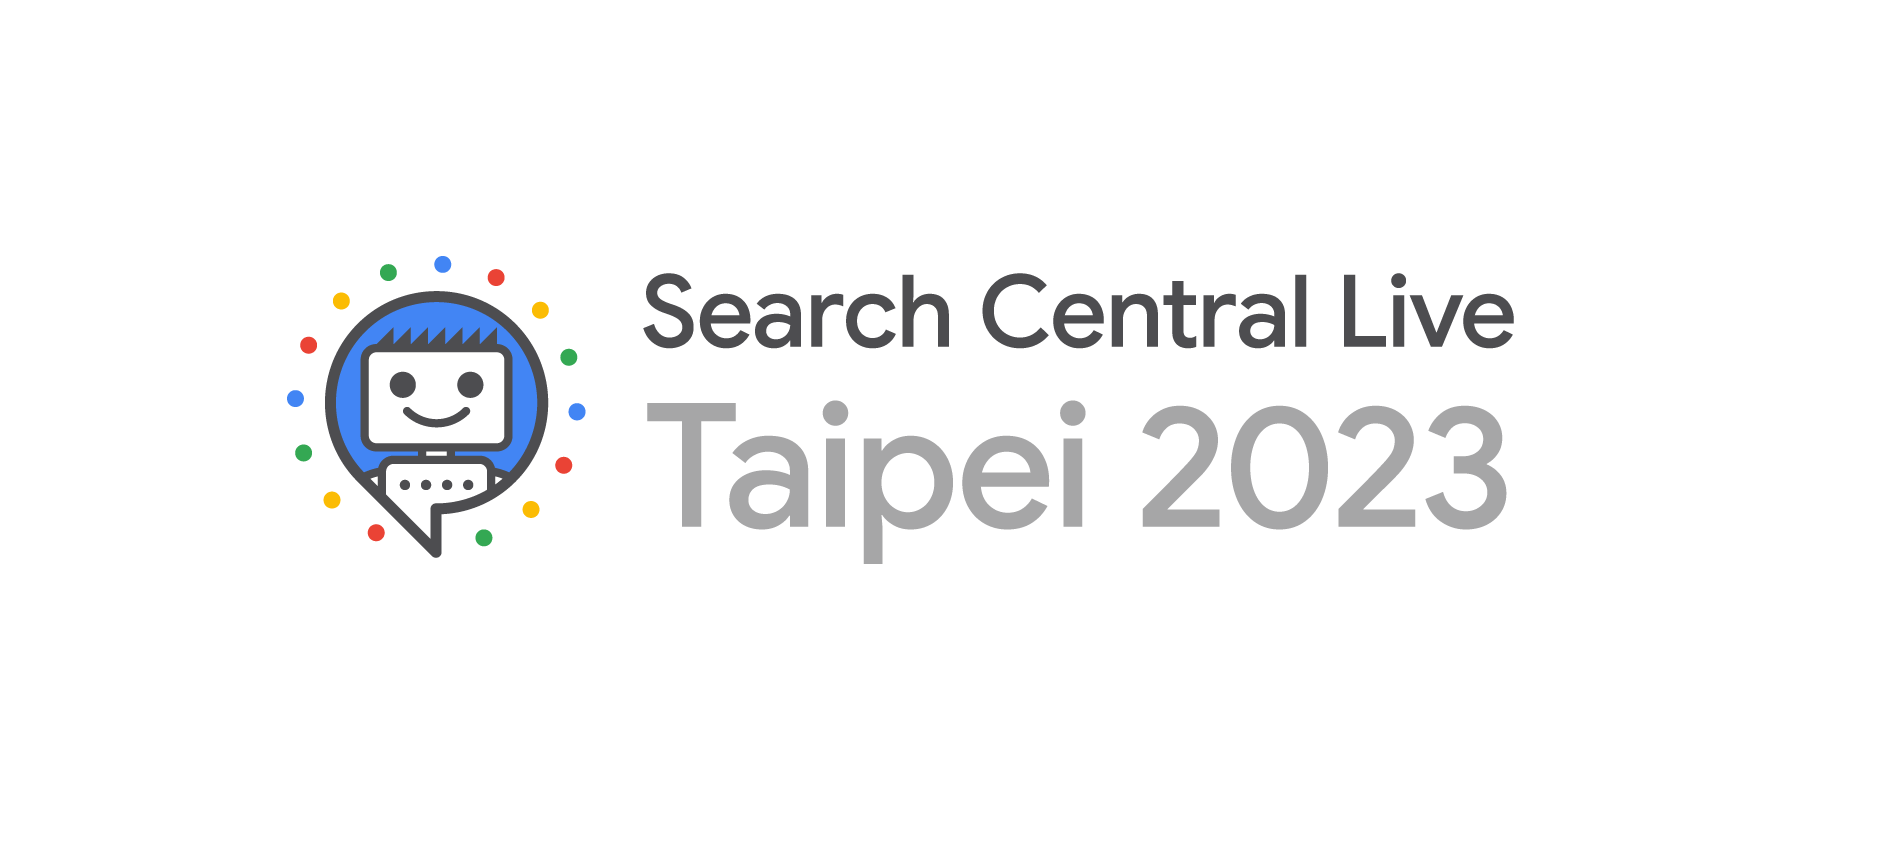 Traditional Chinese Blog: Search Central Live Taipei 2023  |  Google Search Central Blog  |  Google for Developers